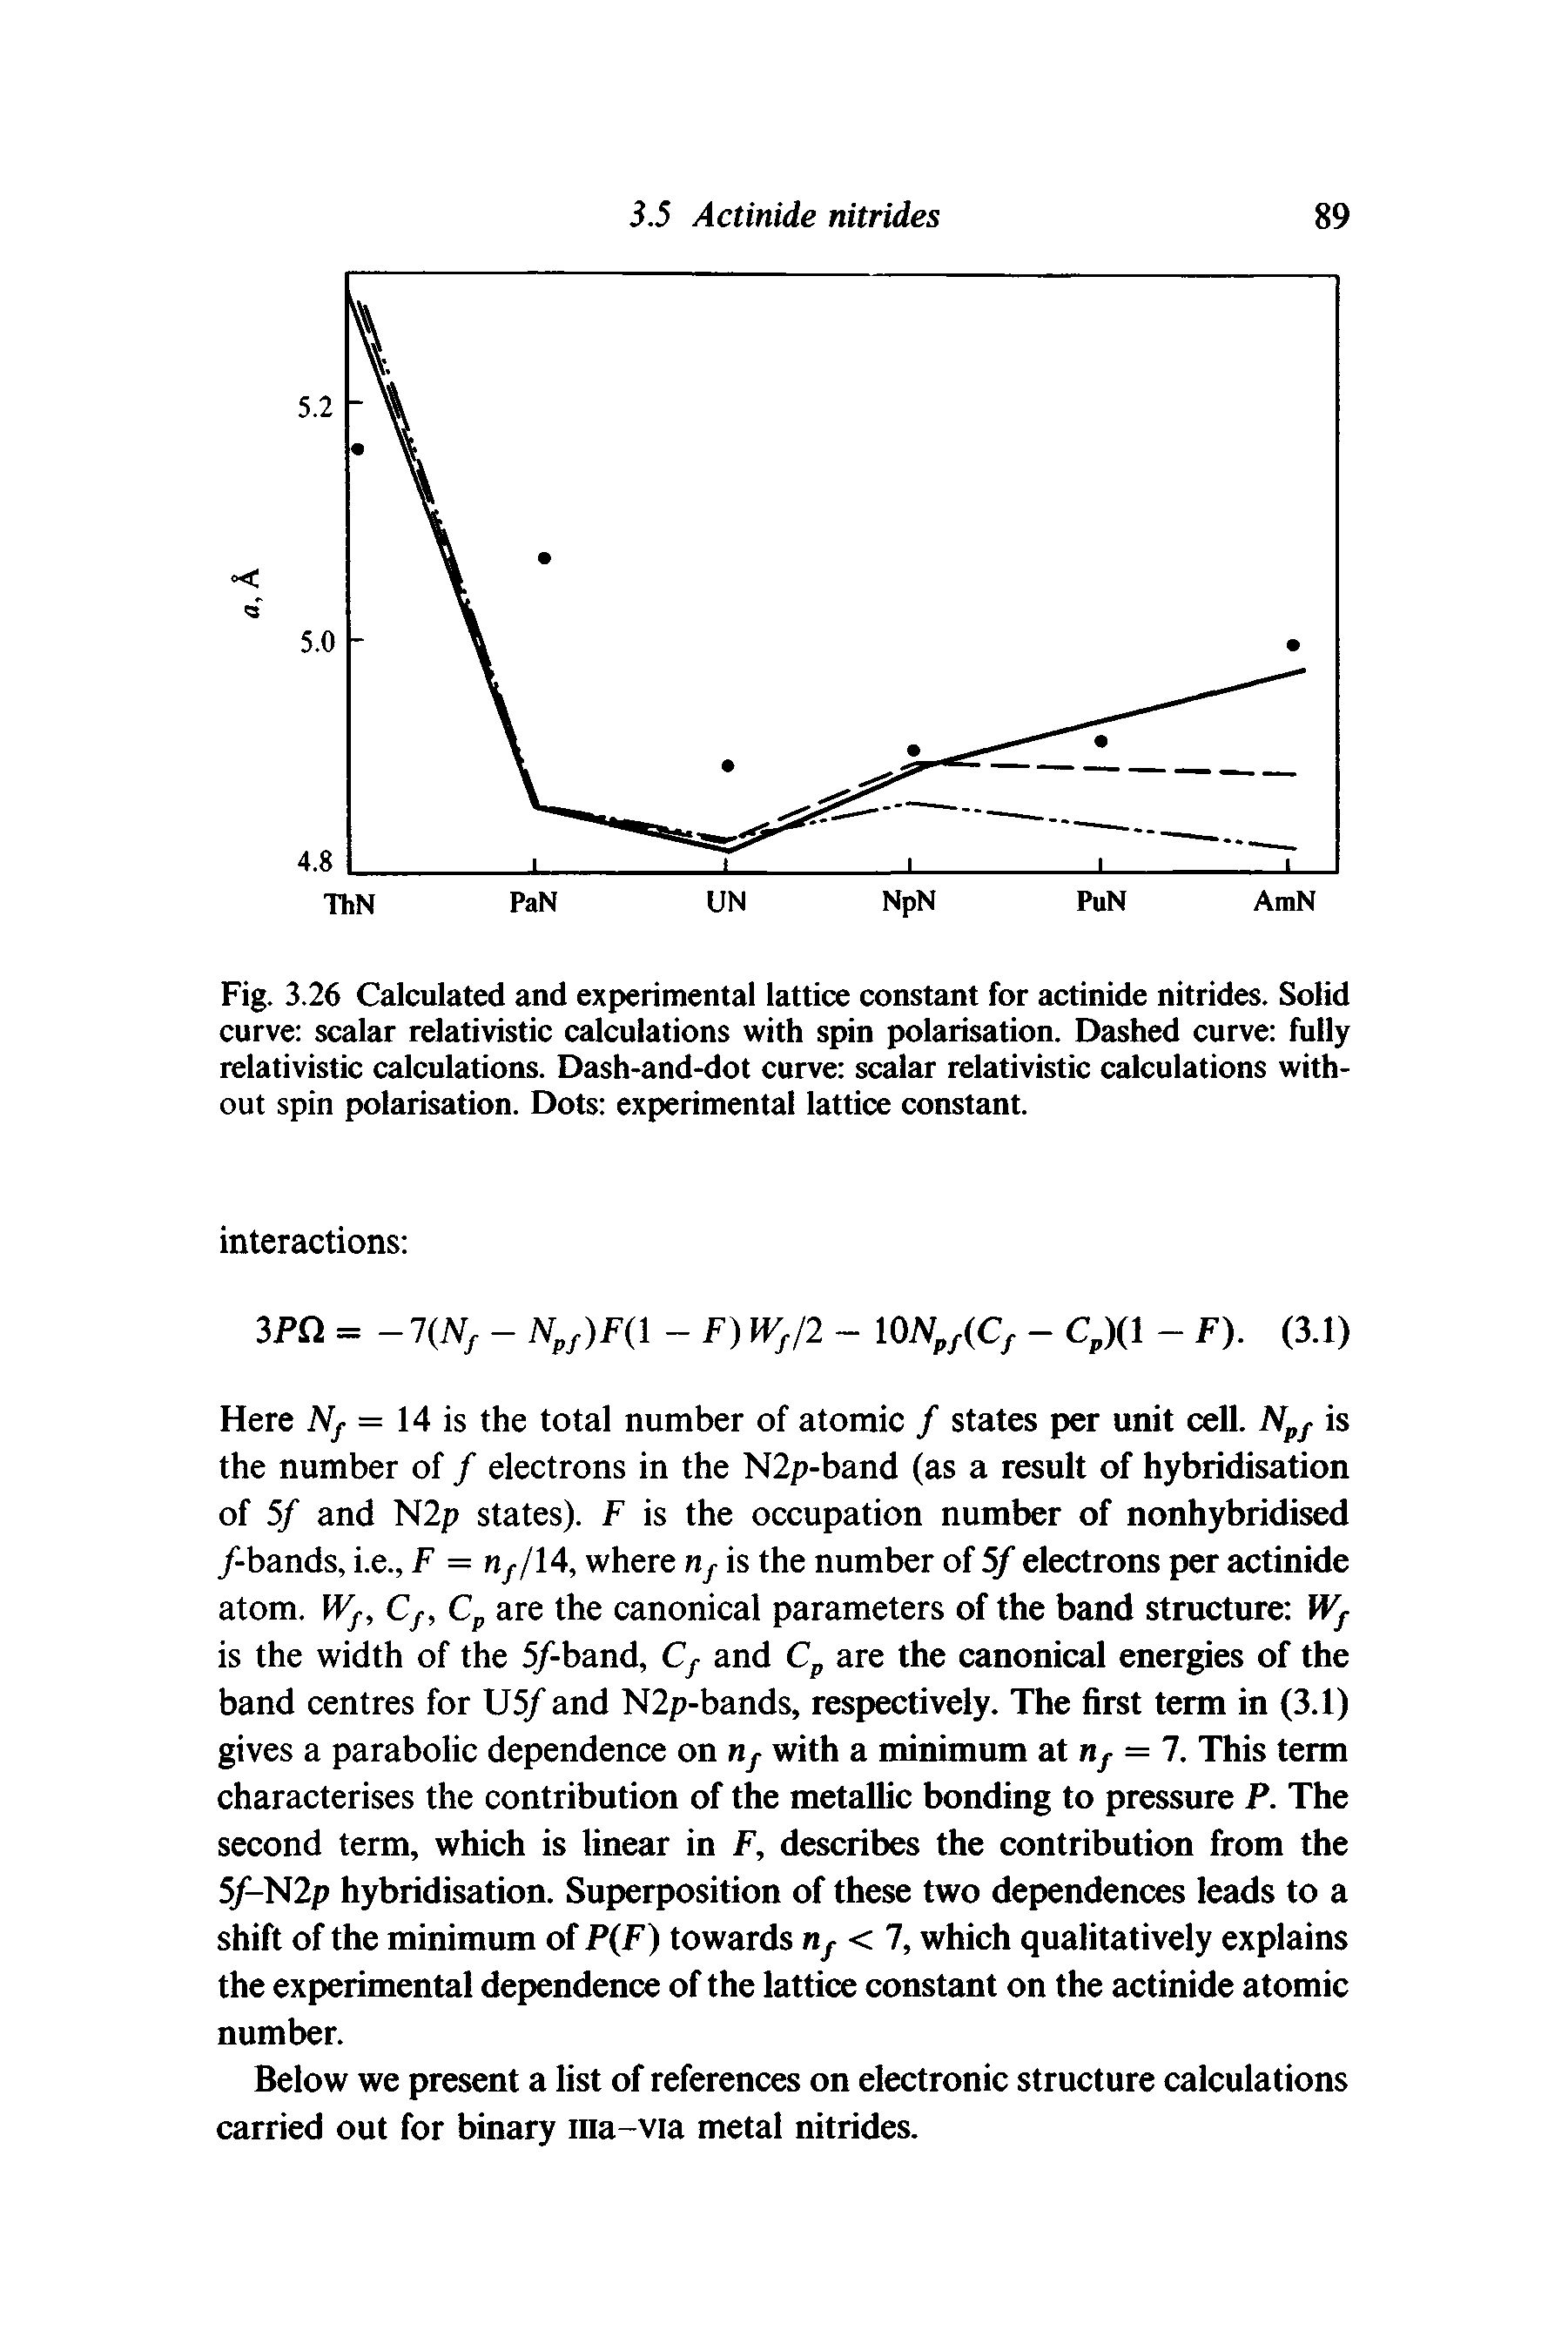 Fig. 3.26 Calculated and experimental lattice constant for actinide nitrides. Solid curve scalar relativistic calculations with spin polarisation. Dashed curve fully relativistic calculations. Dash-and-dot curve scalar relativistic calculations without spin polarisation. Dots experimental lattice constant.